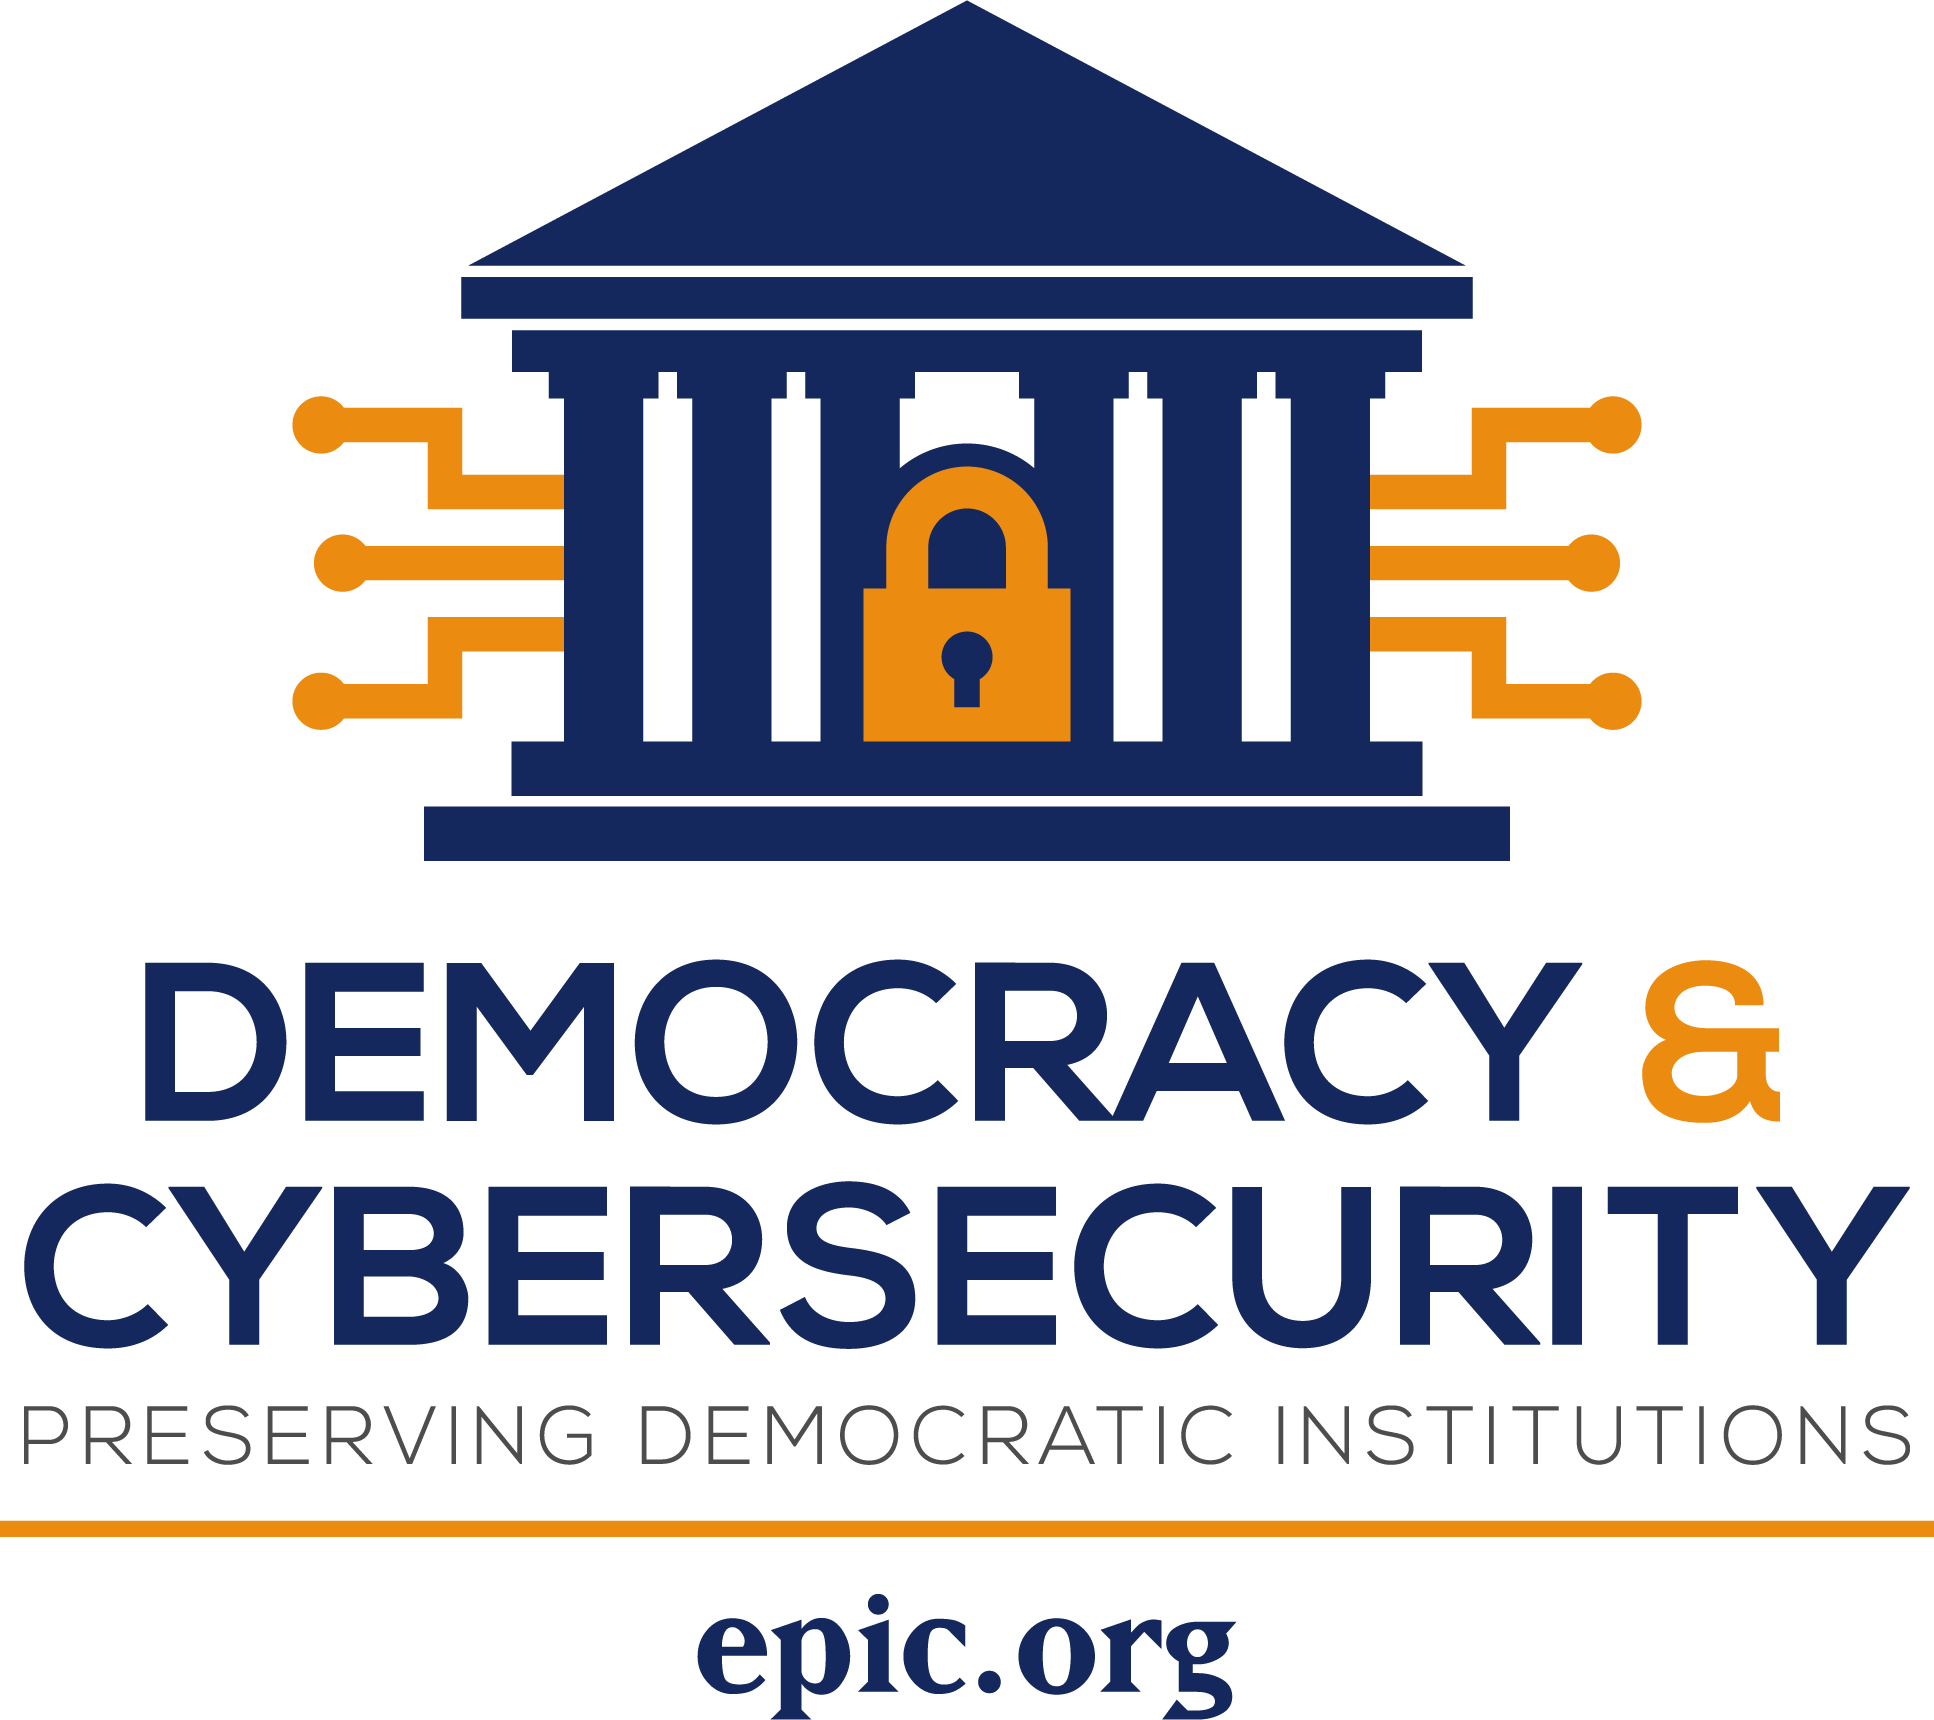 Democracy and Cybersecurity Campaign image